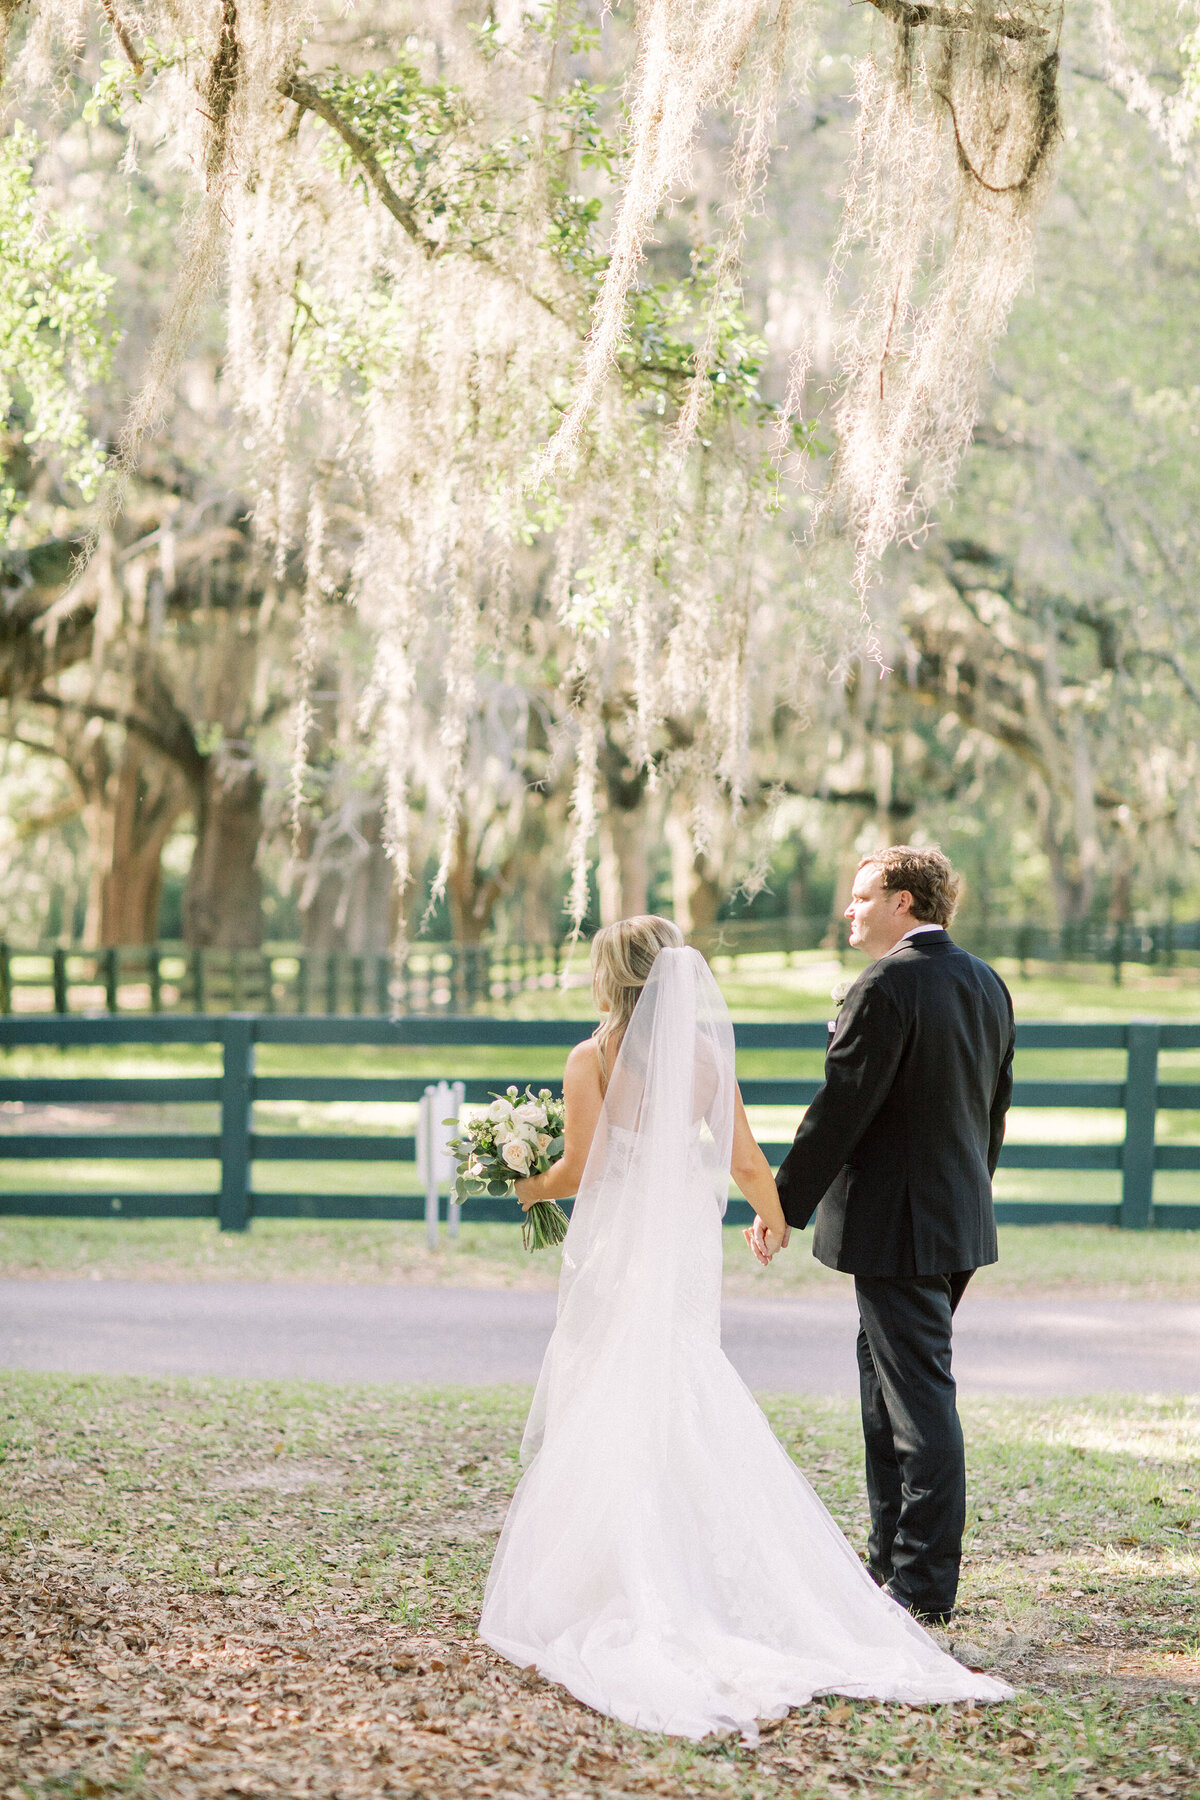 A wedding at Pebble Hill in Thomasville GA - 21